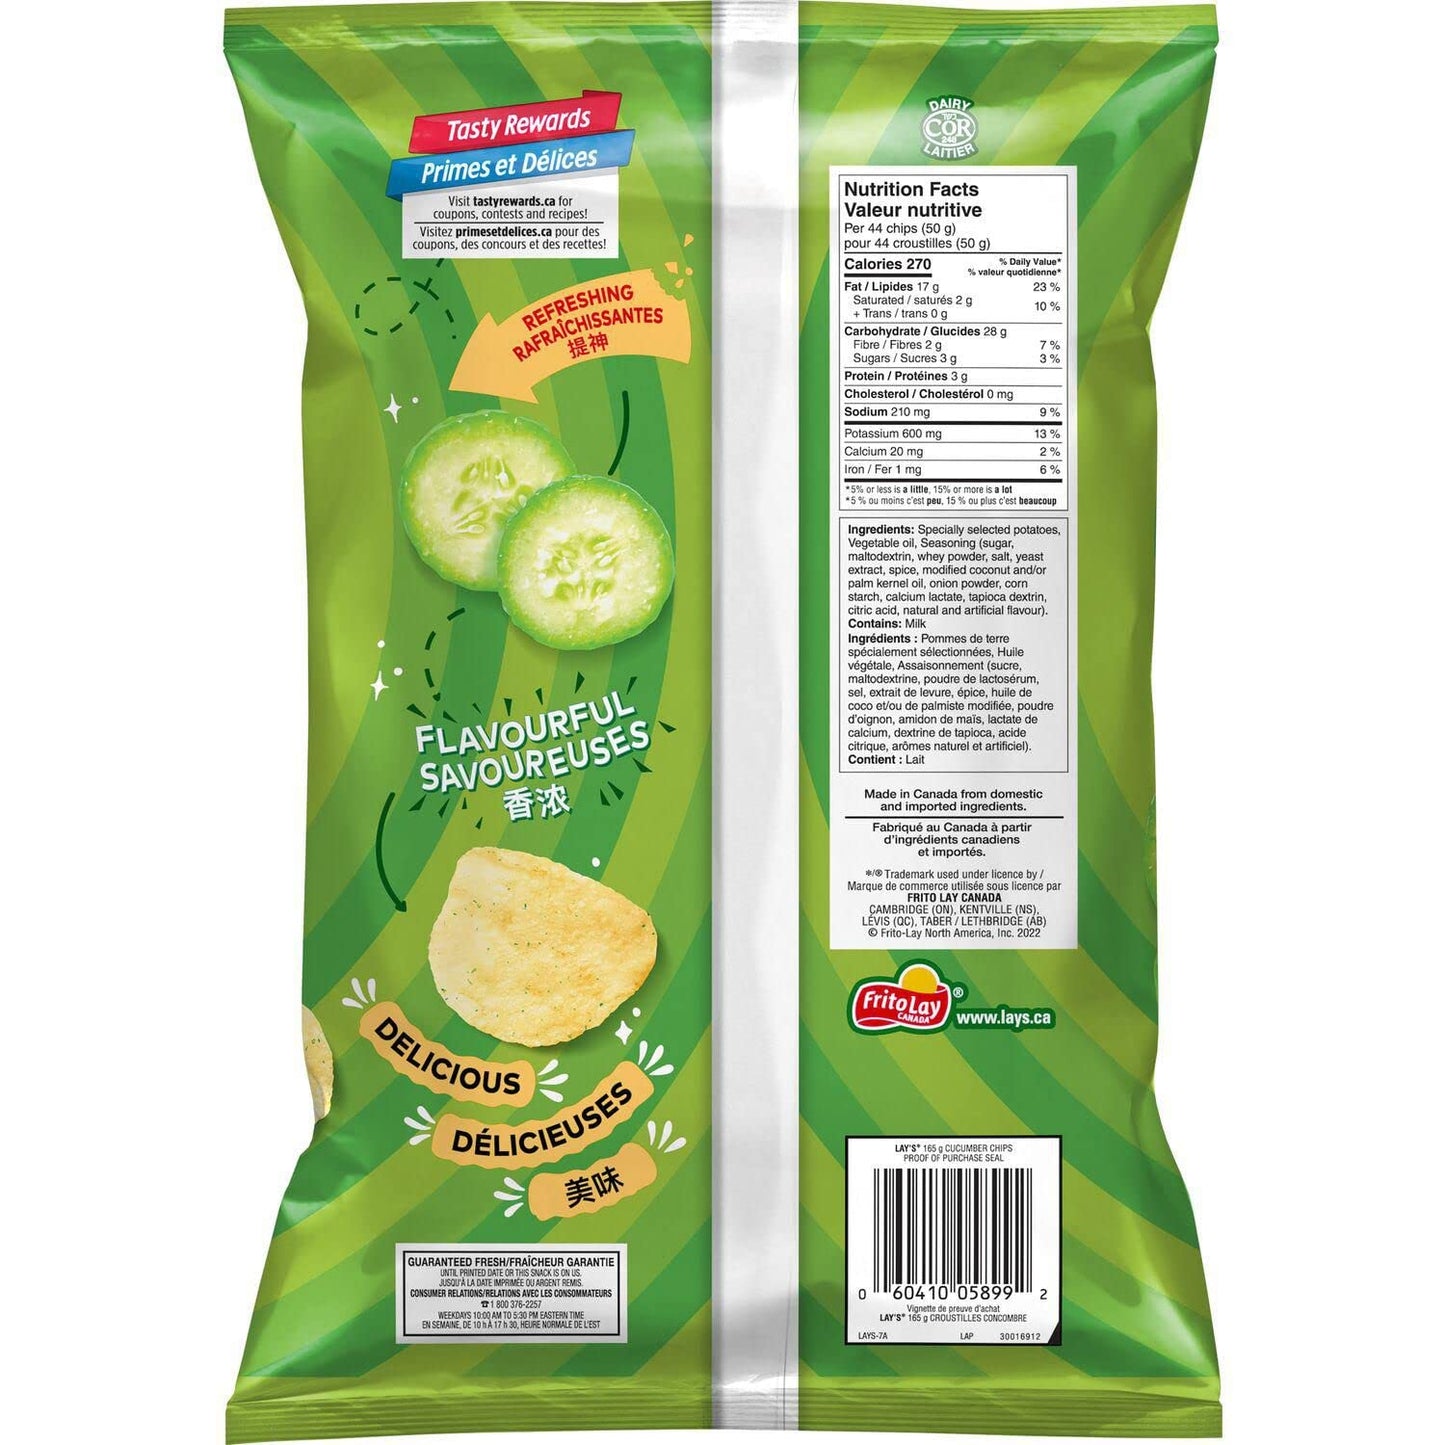 Lays Cucumber Potato Chips back cover